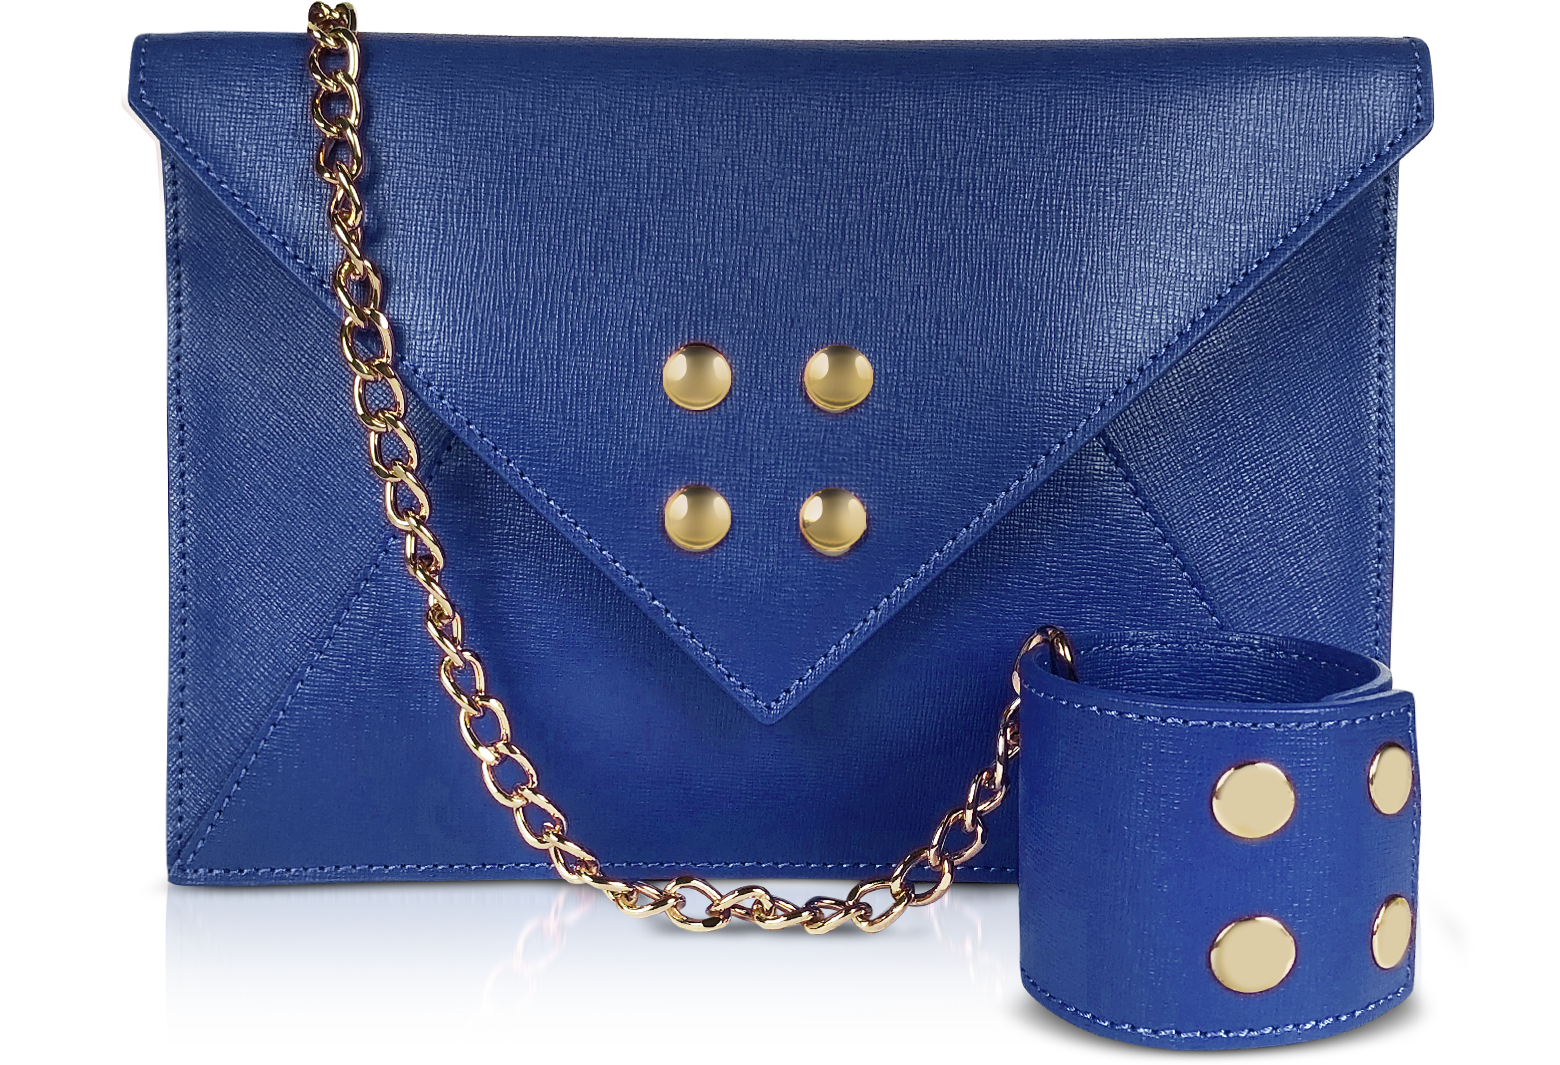 Omely Sea Blue Saffiano Leather Envelope Bag with Wristlet at FORZIERI  Canada